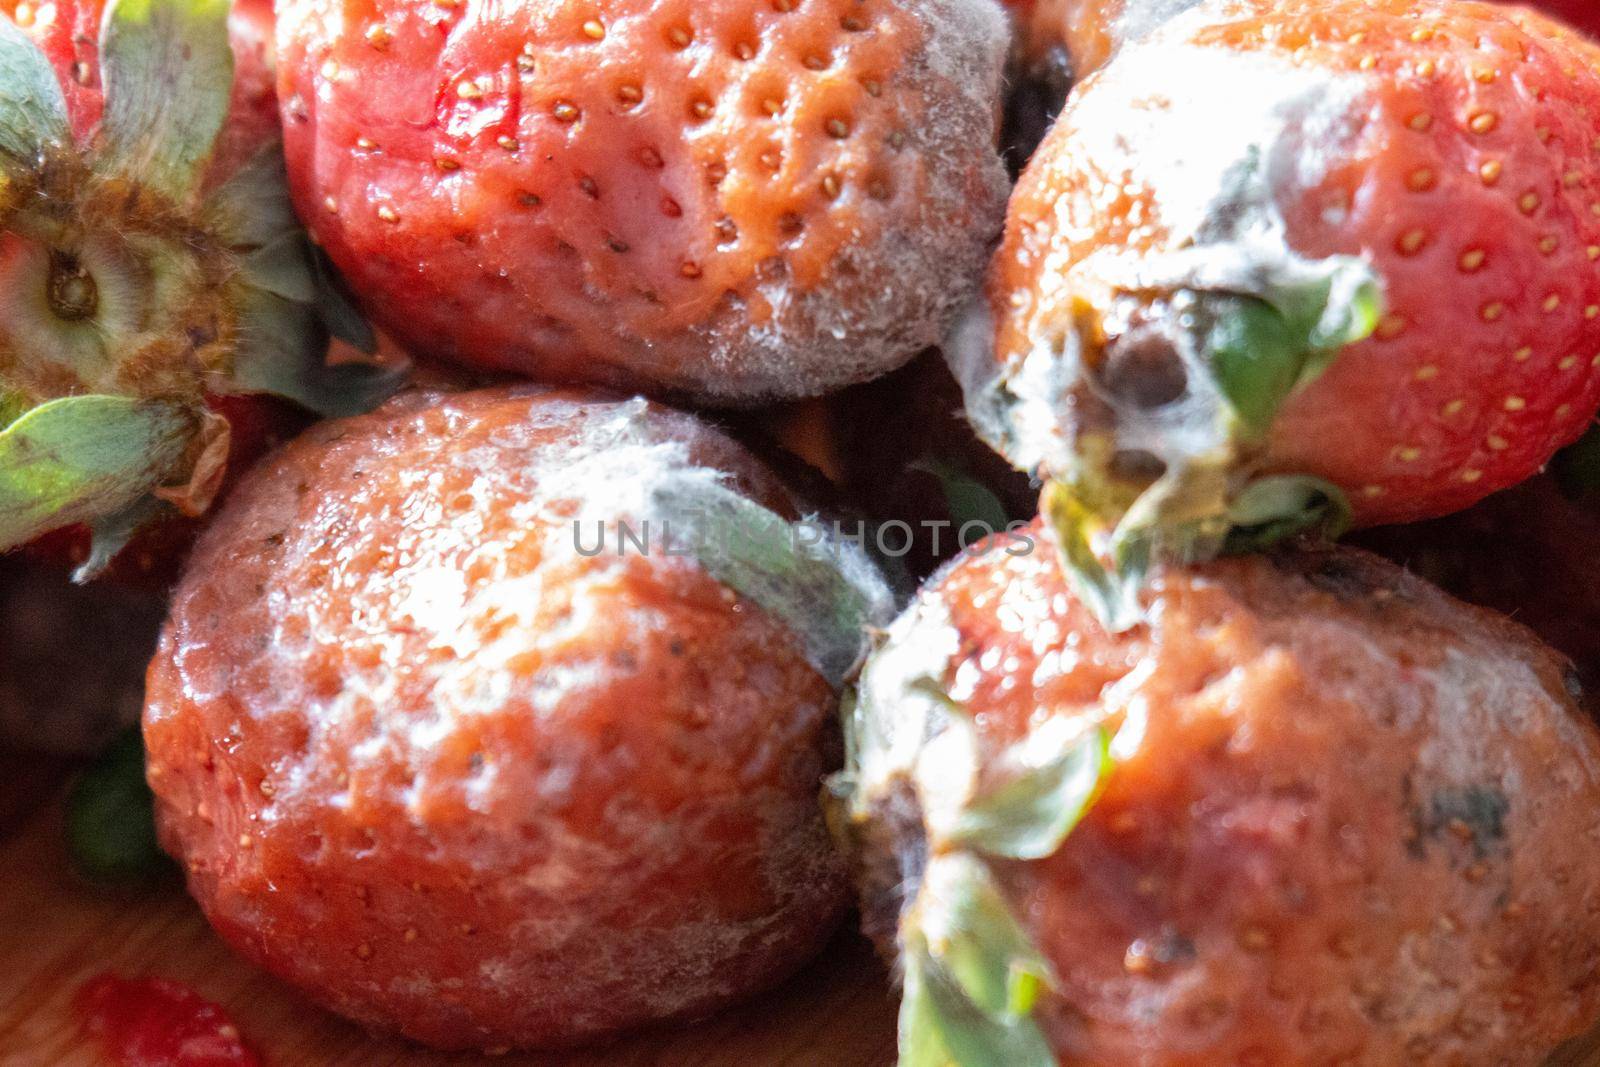 close up photos of moldy strawberries. Food waste is a big issue. High quality photo